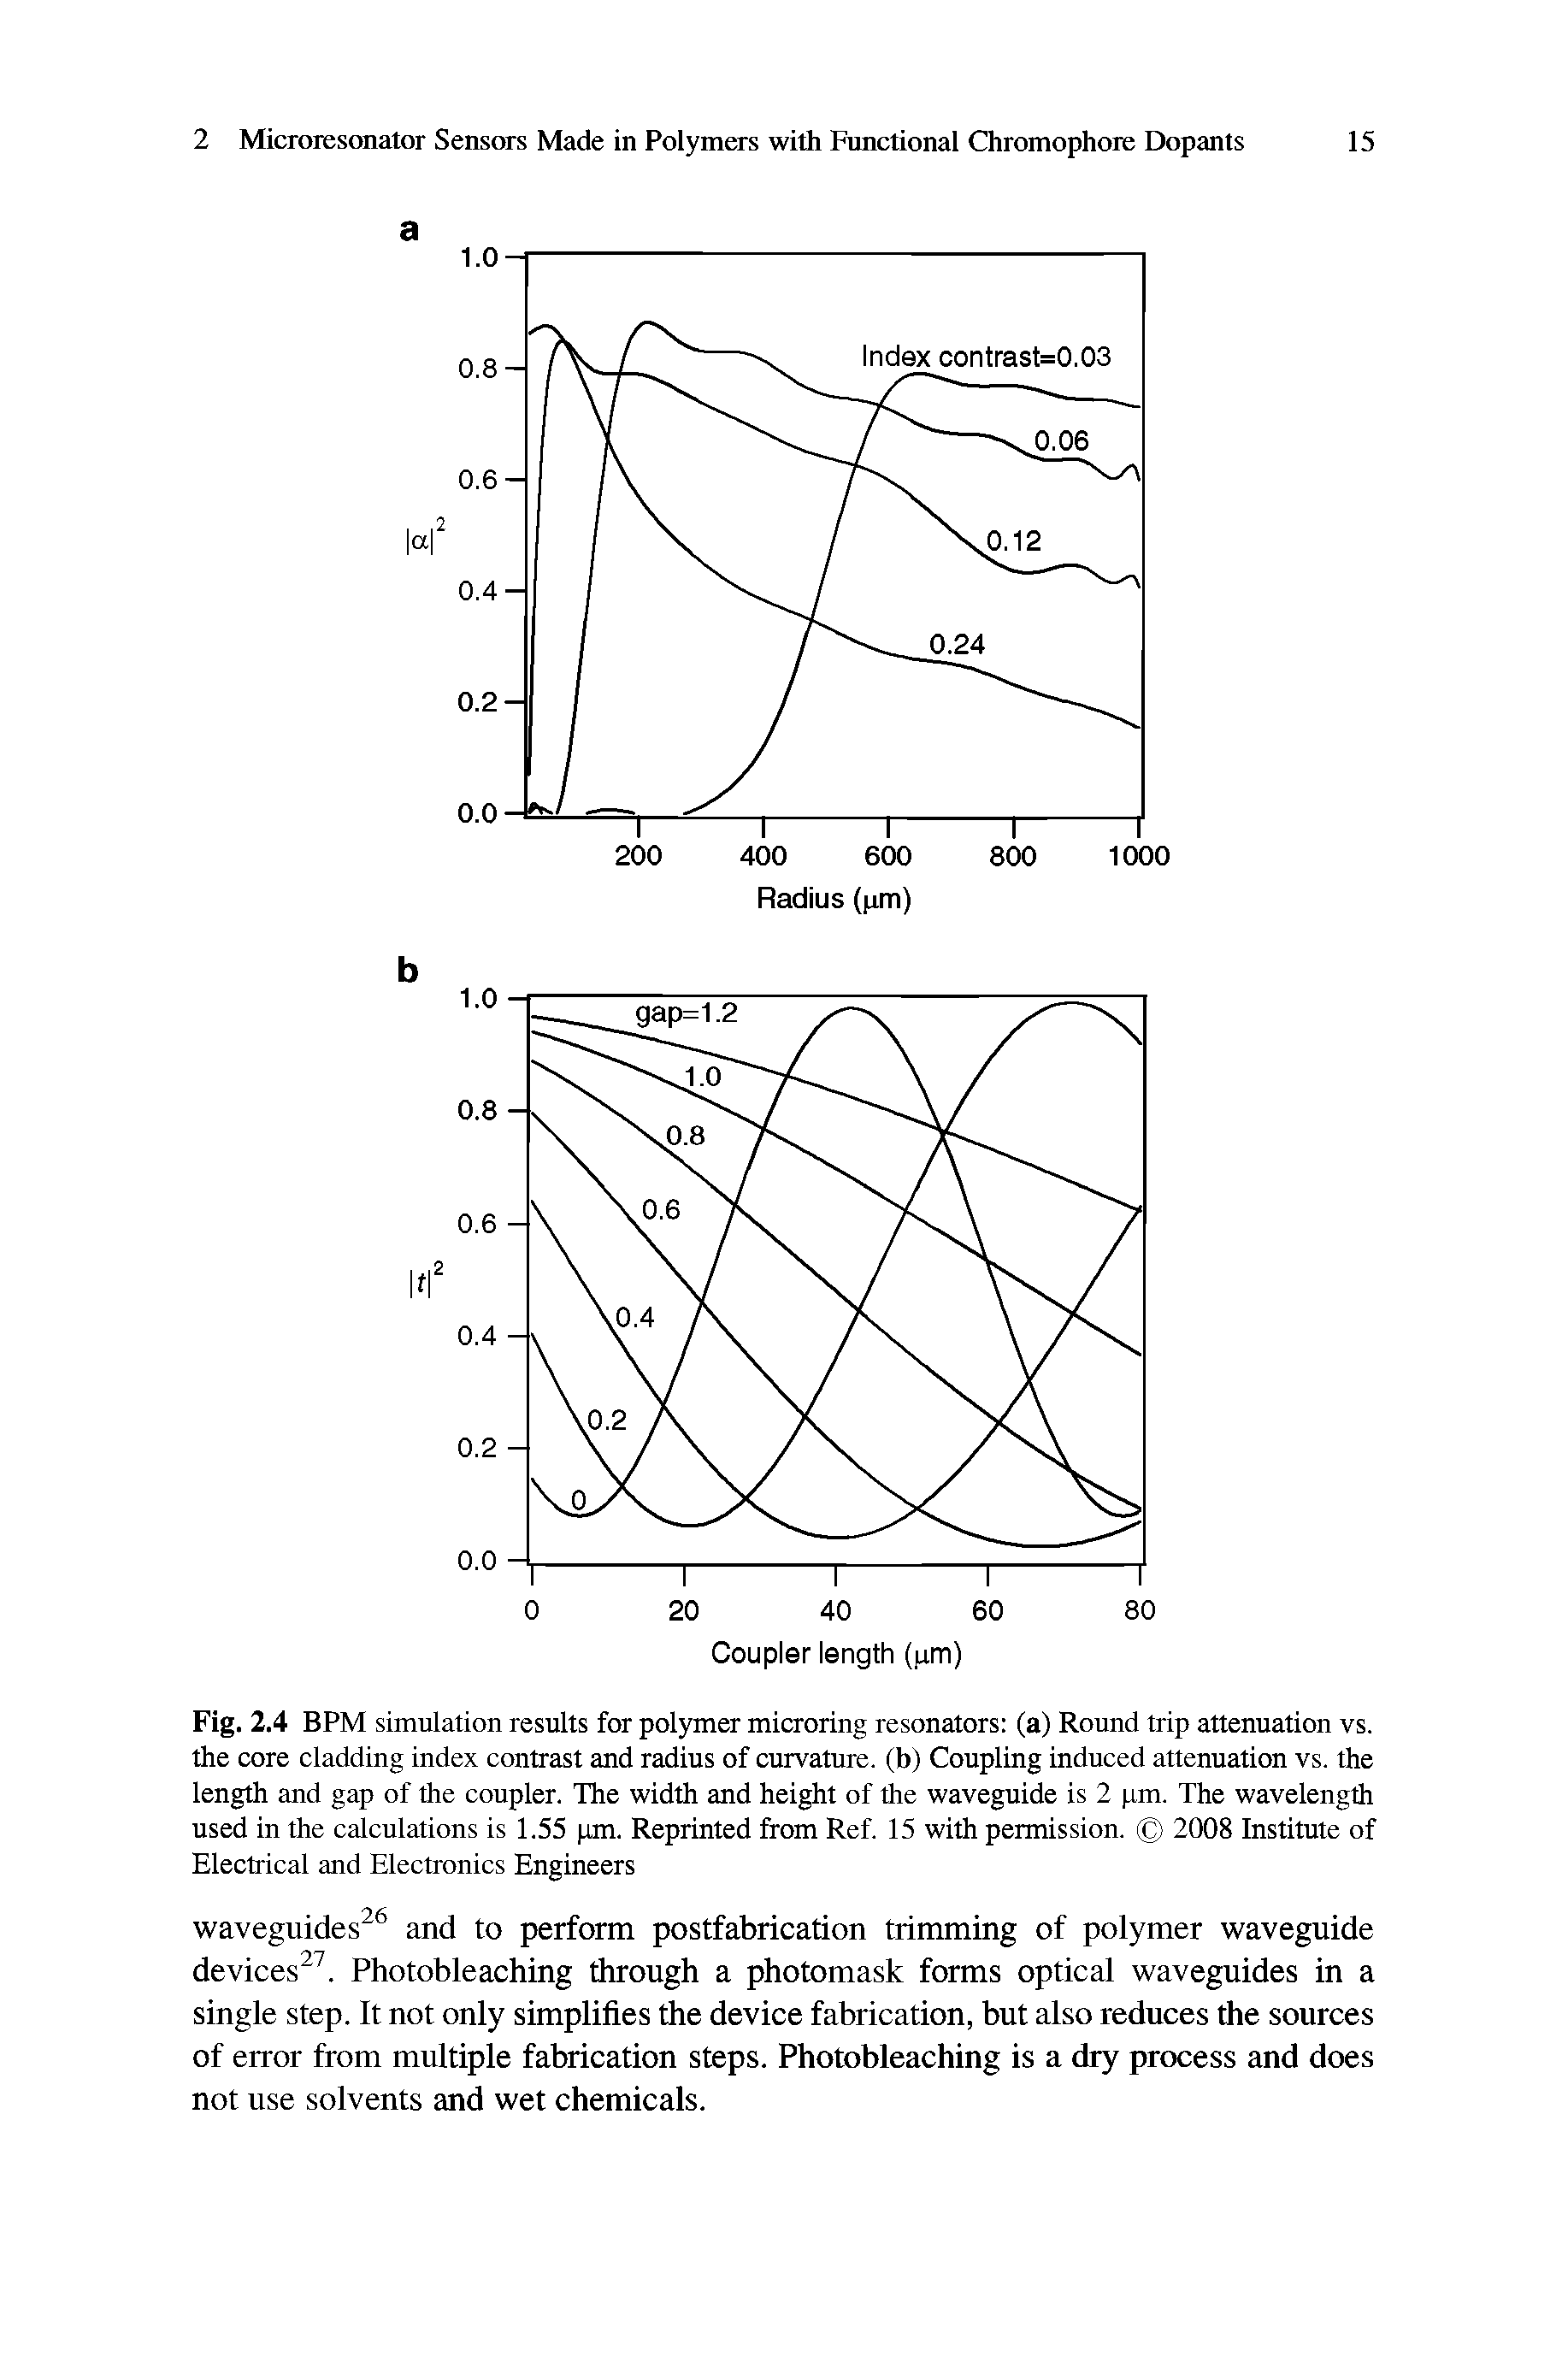 Fig. 2.4 BPM simulation results for polymer microring resonators (a) Round trip attenuation vs. the core cladding index contrast and radius of curvature, (b) Coupling induced attenuation vs. the length and gap of the coupler. The width and height of the waveguide is 2 pm. The wavelength used in the calculations is 1.55 pm. Reprinted from Ref. 15 with permission. 2008 Institute of Electrical and Electronics Engineers...